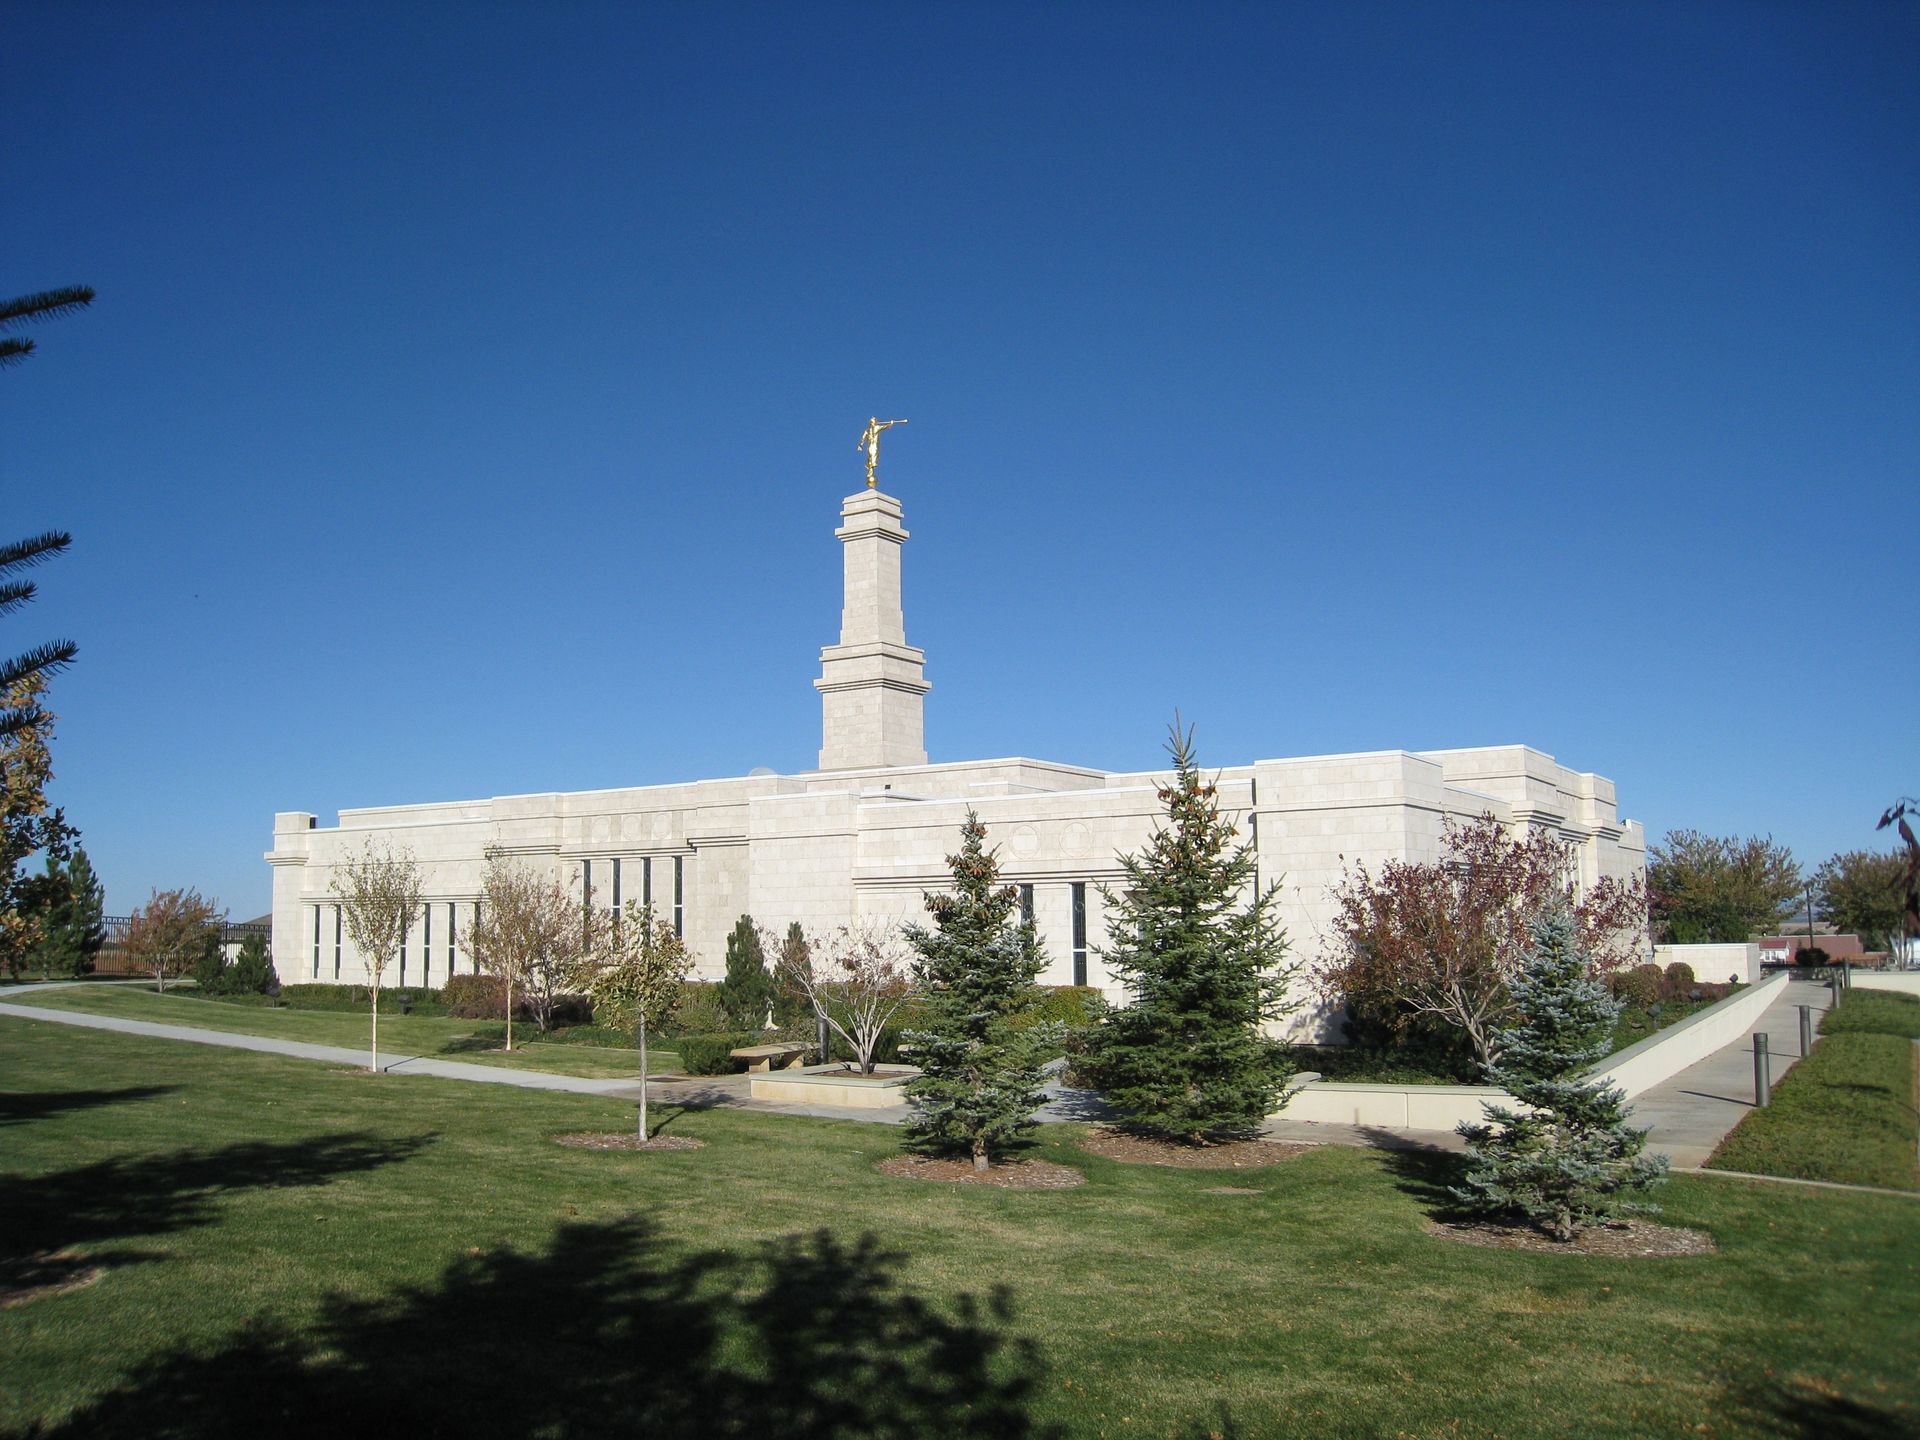 The Monticello Utah Temple back view, including scenery.